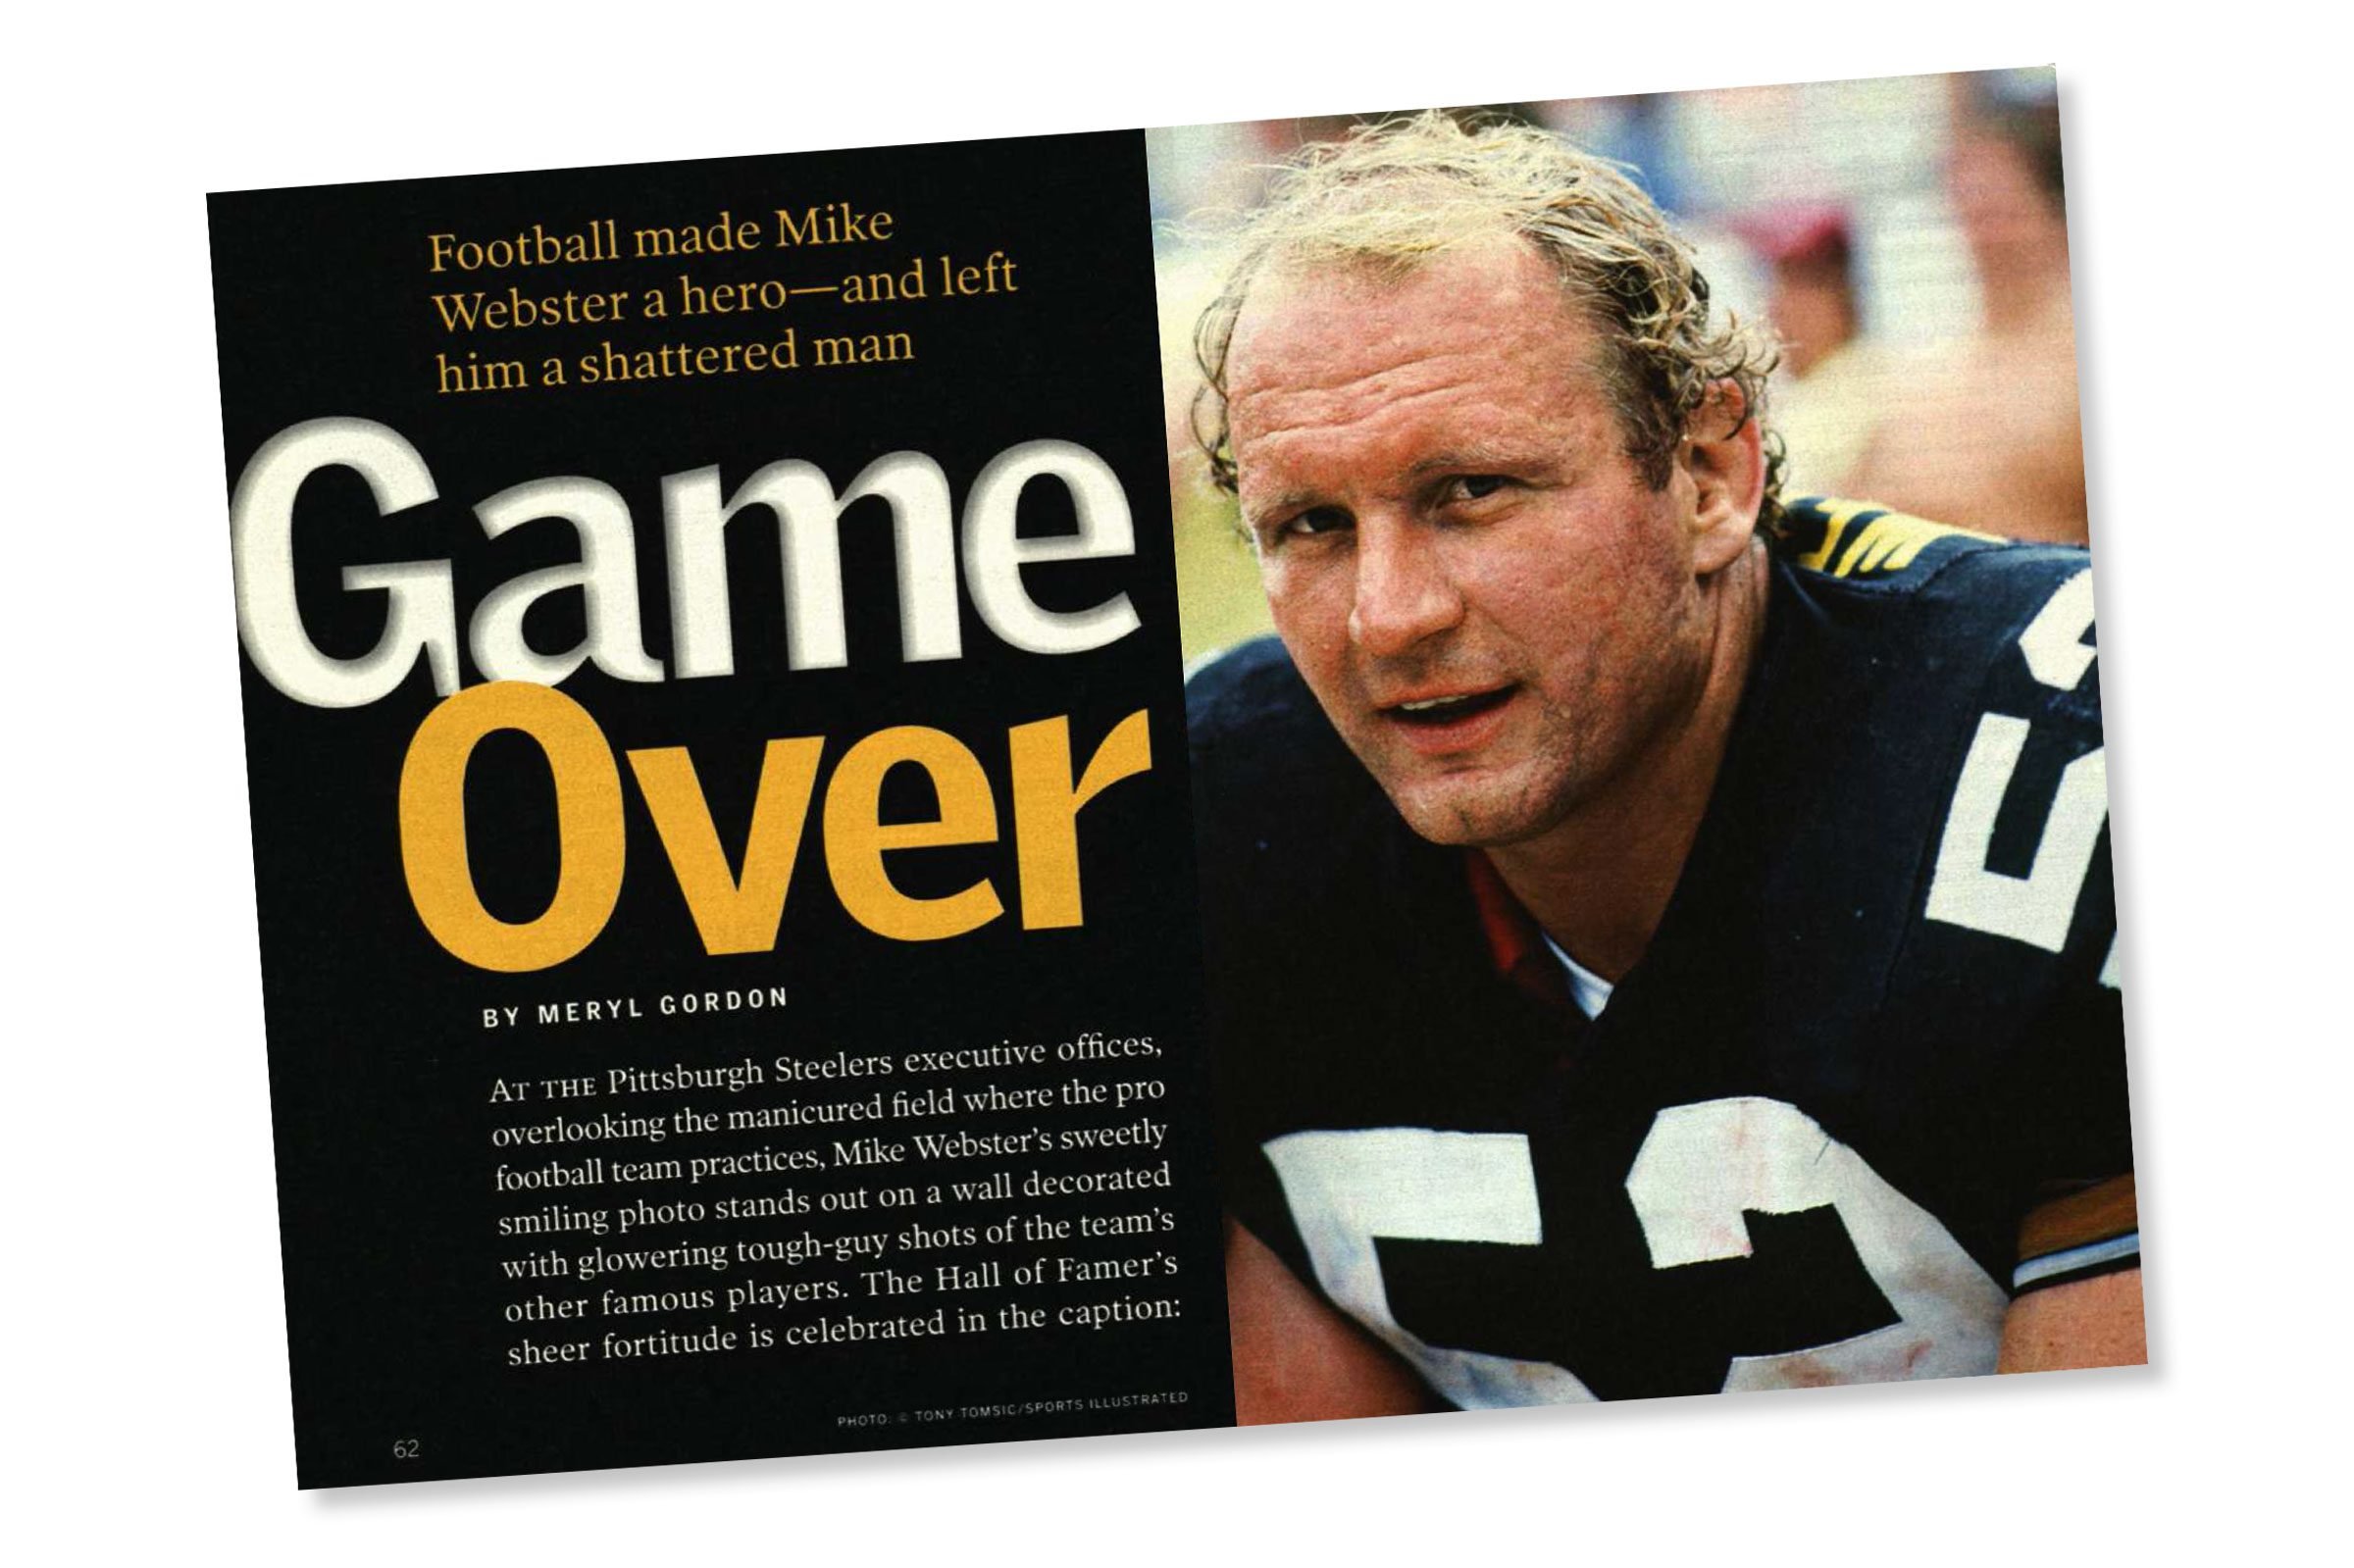 Before 'Concussion': Mike Webster's Shattered Life